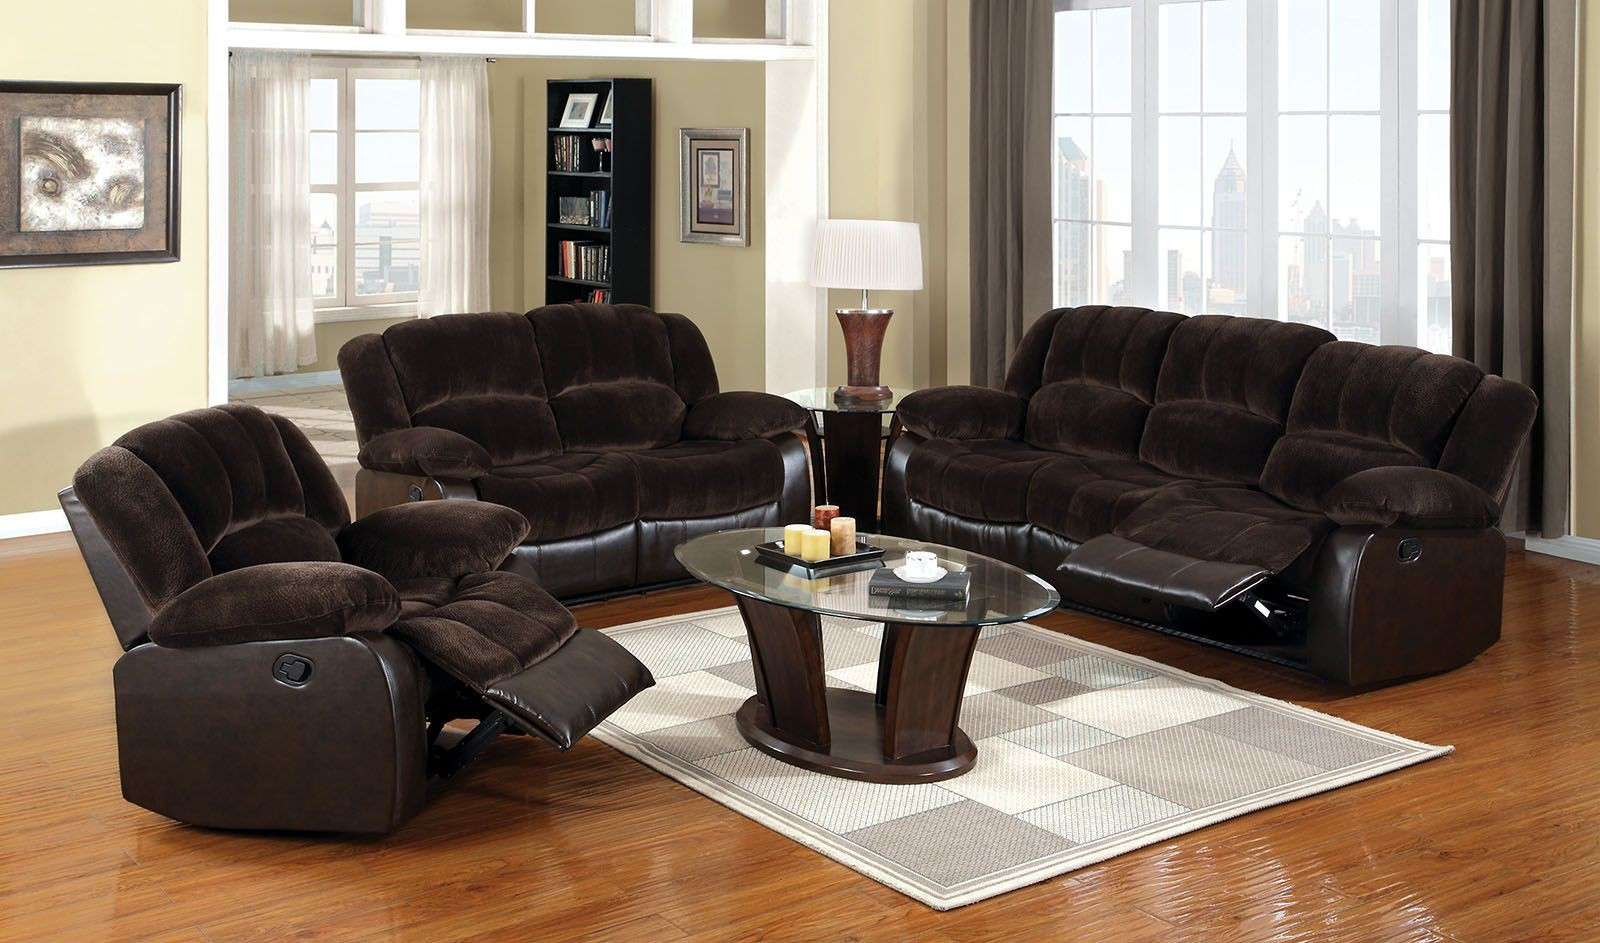 Rustic Living Room Furniture Sets
 Winslow Rustic Brown Reclining Living Room Set from